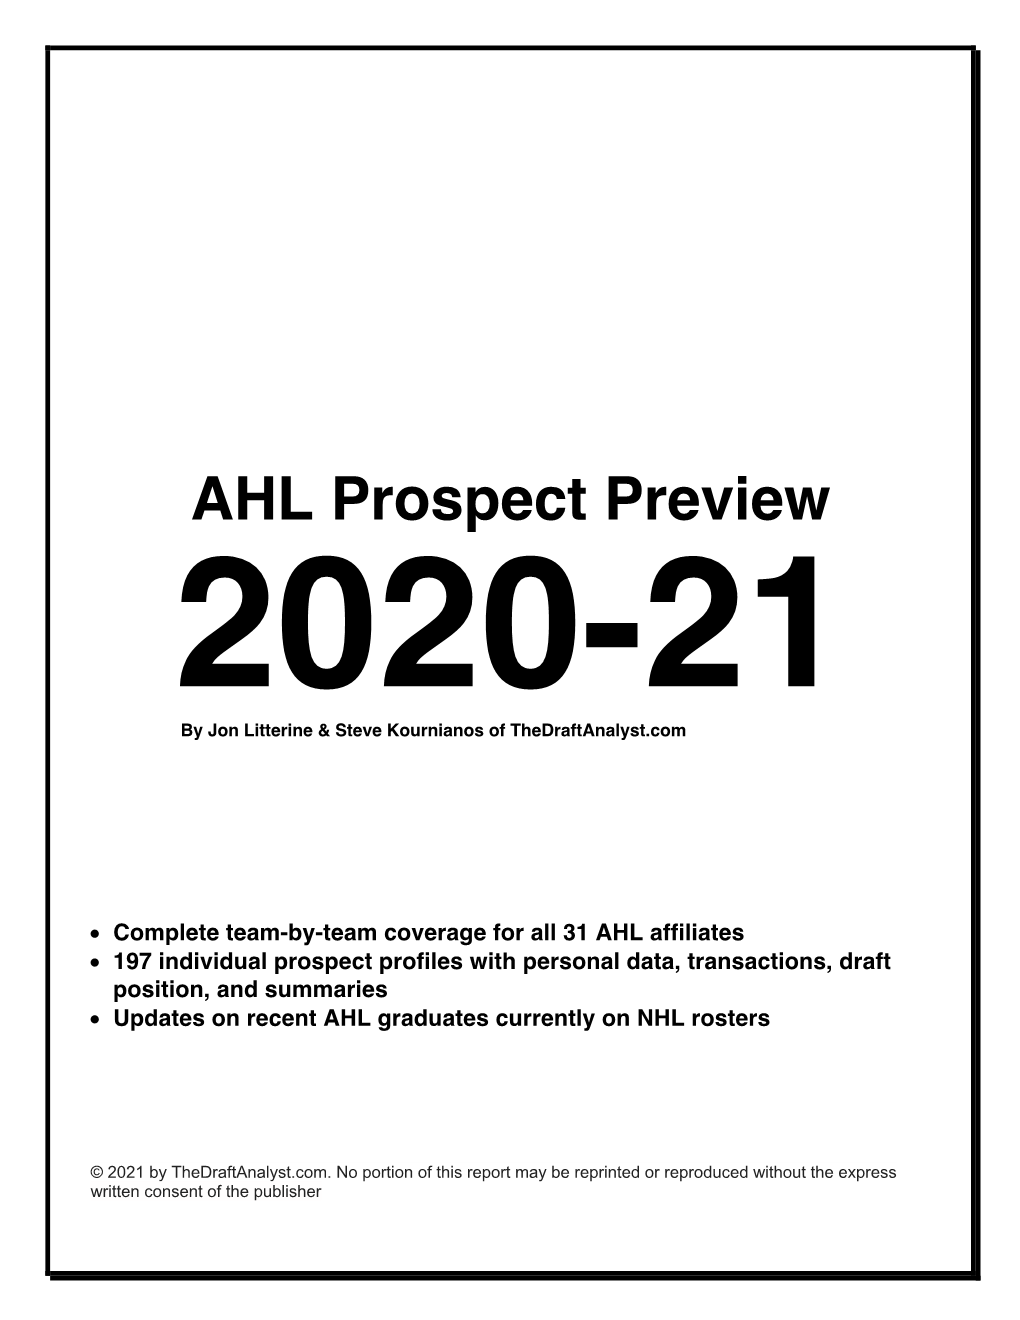 AHL Prospect Preview 2020-21 by Jon Litterine & Steve Kournianos of Thedraftanalyst.Com